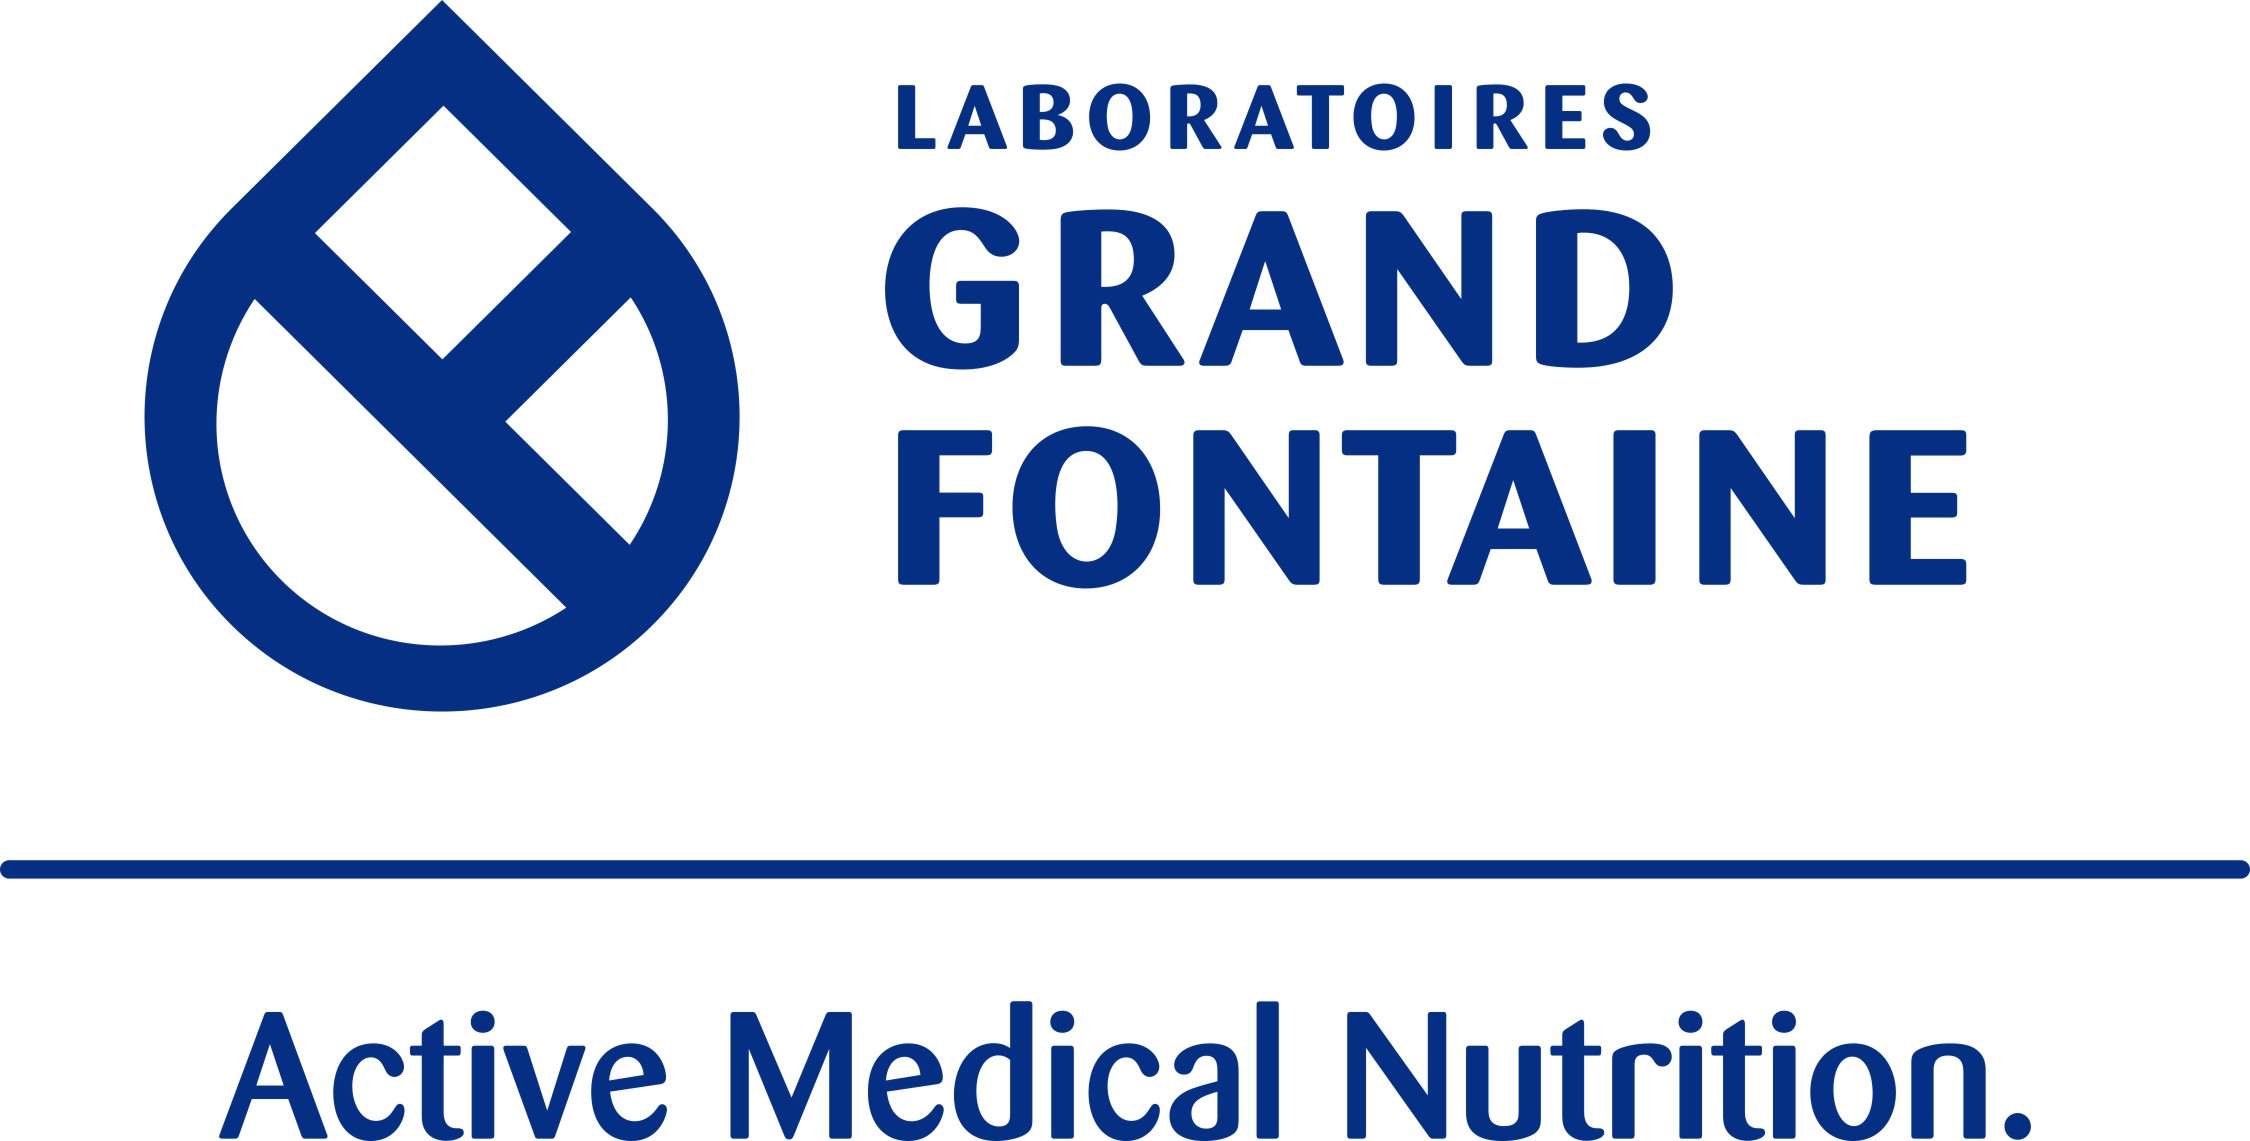 Email: info@grandfontaine.eu Web: www.grandfontaine.eu/ “Laboratoires Grand Fontaine is an international healthcare company specialized in investigating, developing and manufacturing adult medical nutrition products. For people suffering from malnutrition due to their advanced age, or with special dietary needs as a result of a variety of conditions – including cancer, diabetes, multiple trauma, or surgery – an optimum nutritional management is essential to maintain quality of life, and reduce the risk of morbidity and mortality. The FontActiv® range brings advanced recipes and appetizing natural ingredients for treating malnutrition, dehydration, sarcopenia, diabetes and dysphagia, as well as many other disorders.”